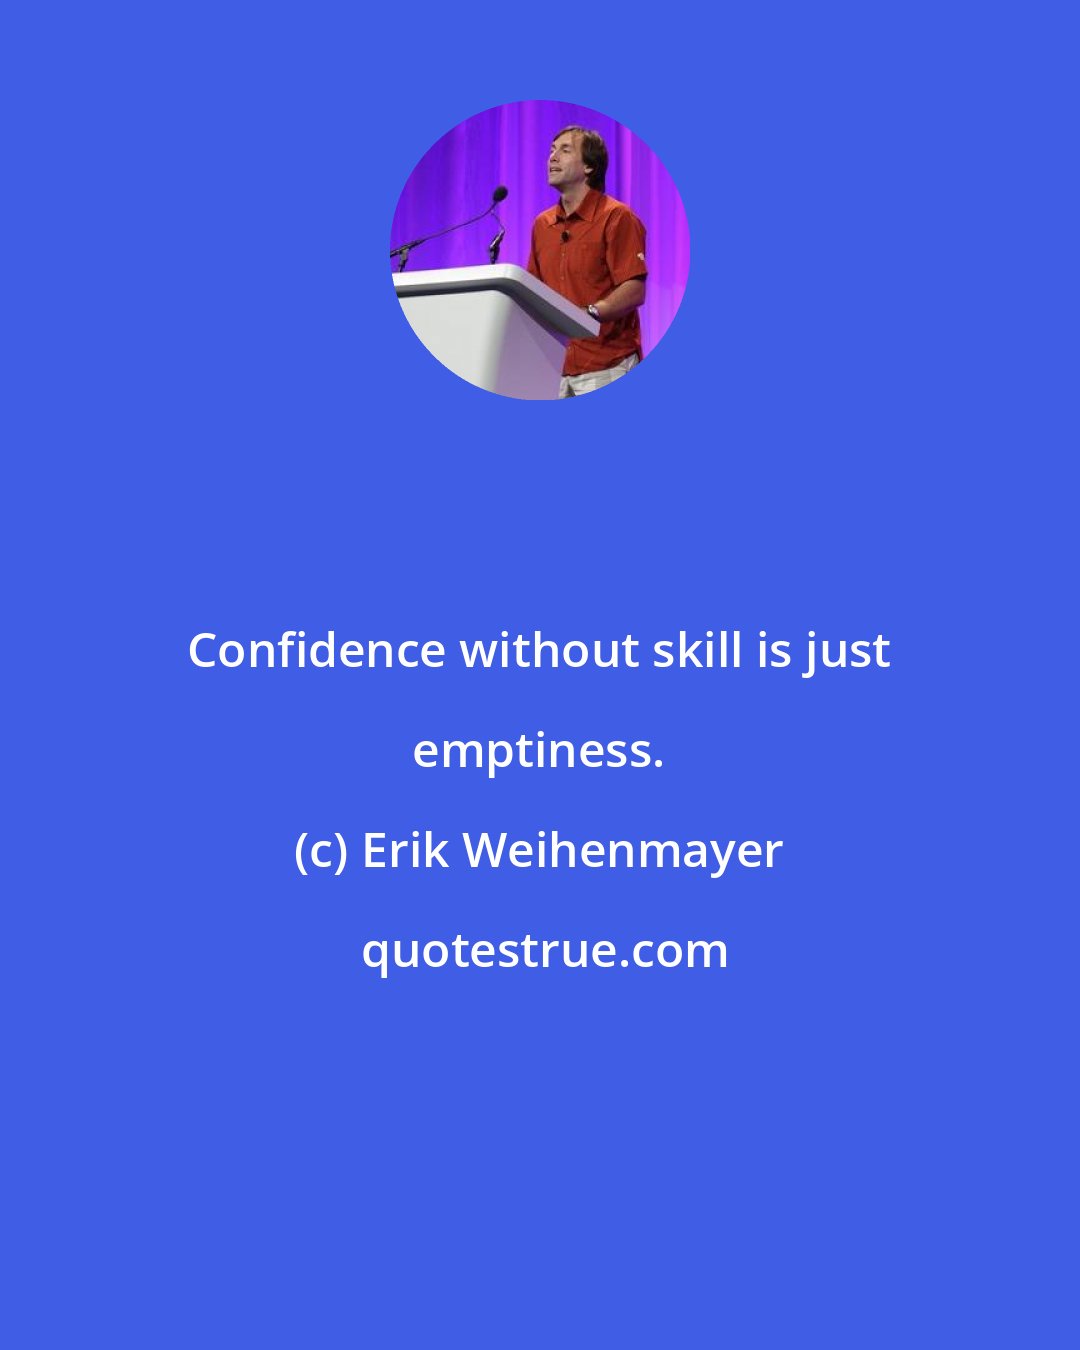 Erik Weihenmayer: Confidence without skill is just emptiness.